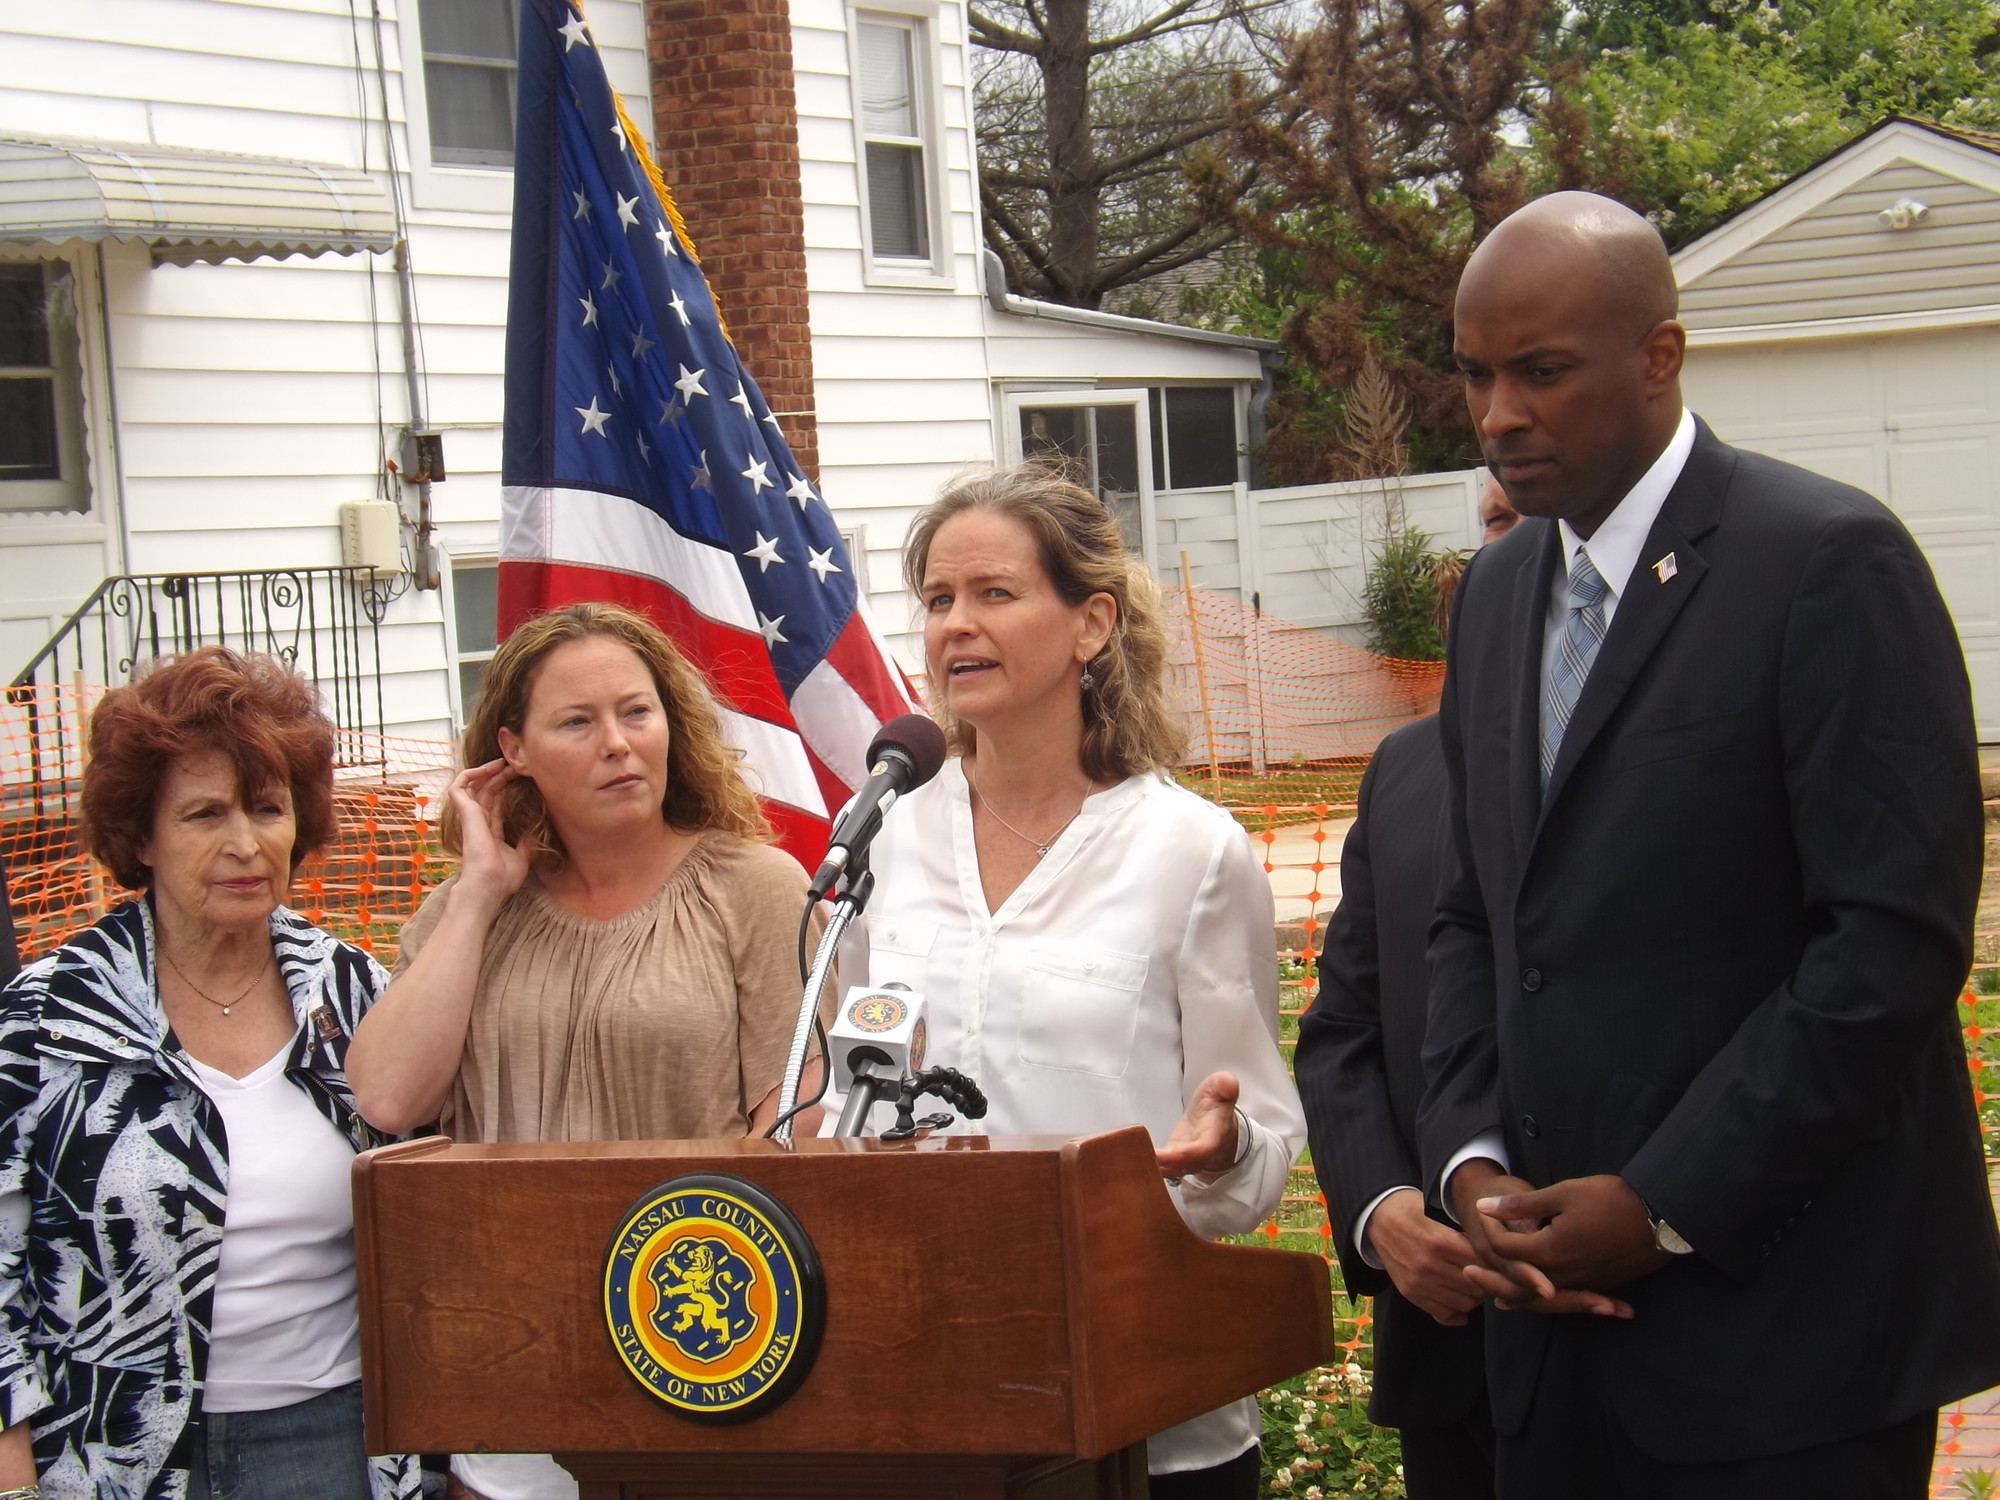 Legislator Laura Curran , second from right and her colleagues in the County Legislature, including Norma Gonsalves, far left, and Kevan Abrahams, said that re-funding the program was the right move at a press conference last week in front of the property of East Rockaway resident Theresa Gaffney, second from left.